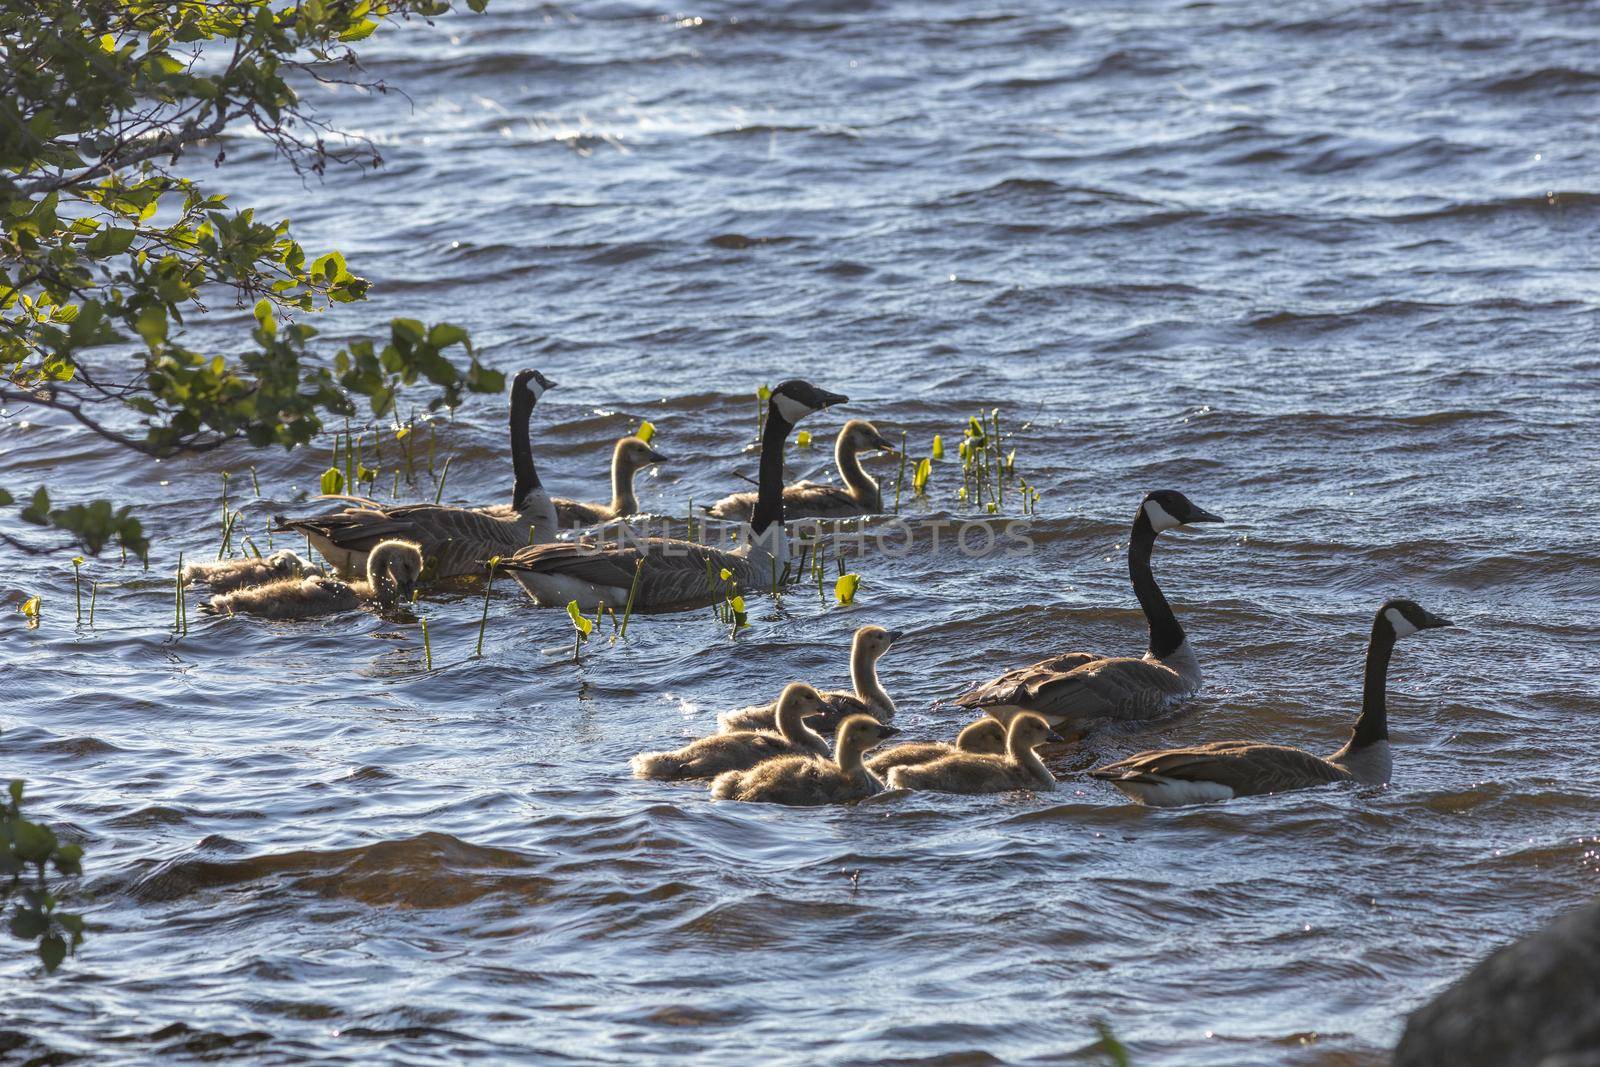 Canada geese and their goslings in the water by colintemple